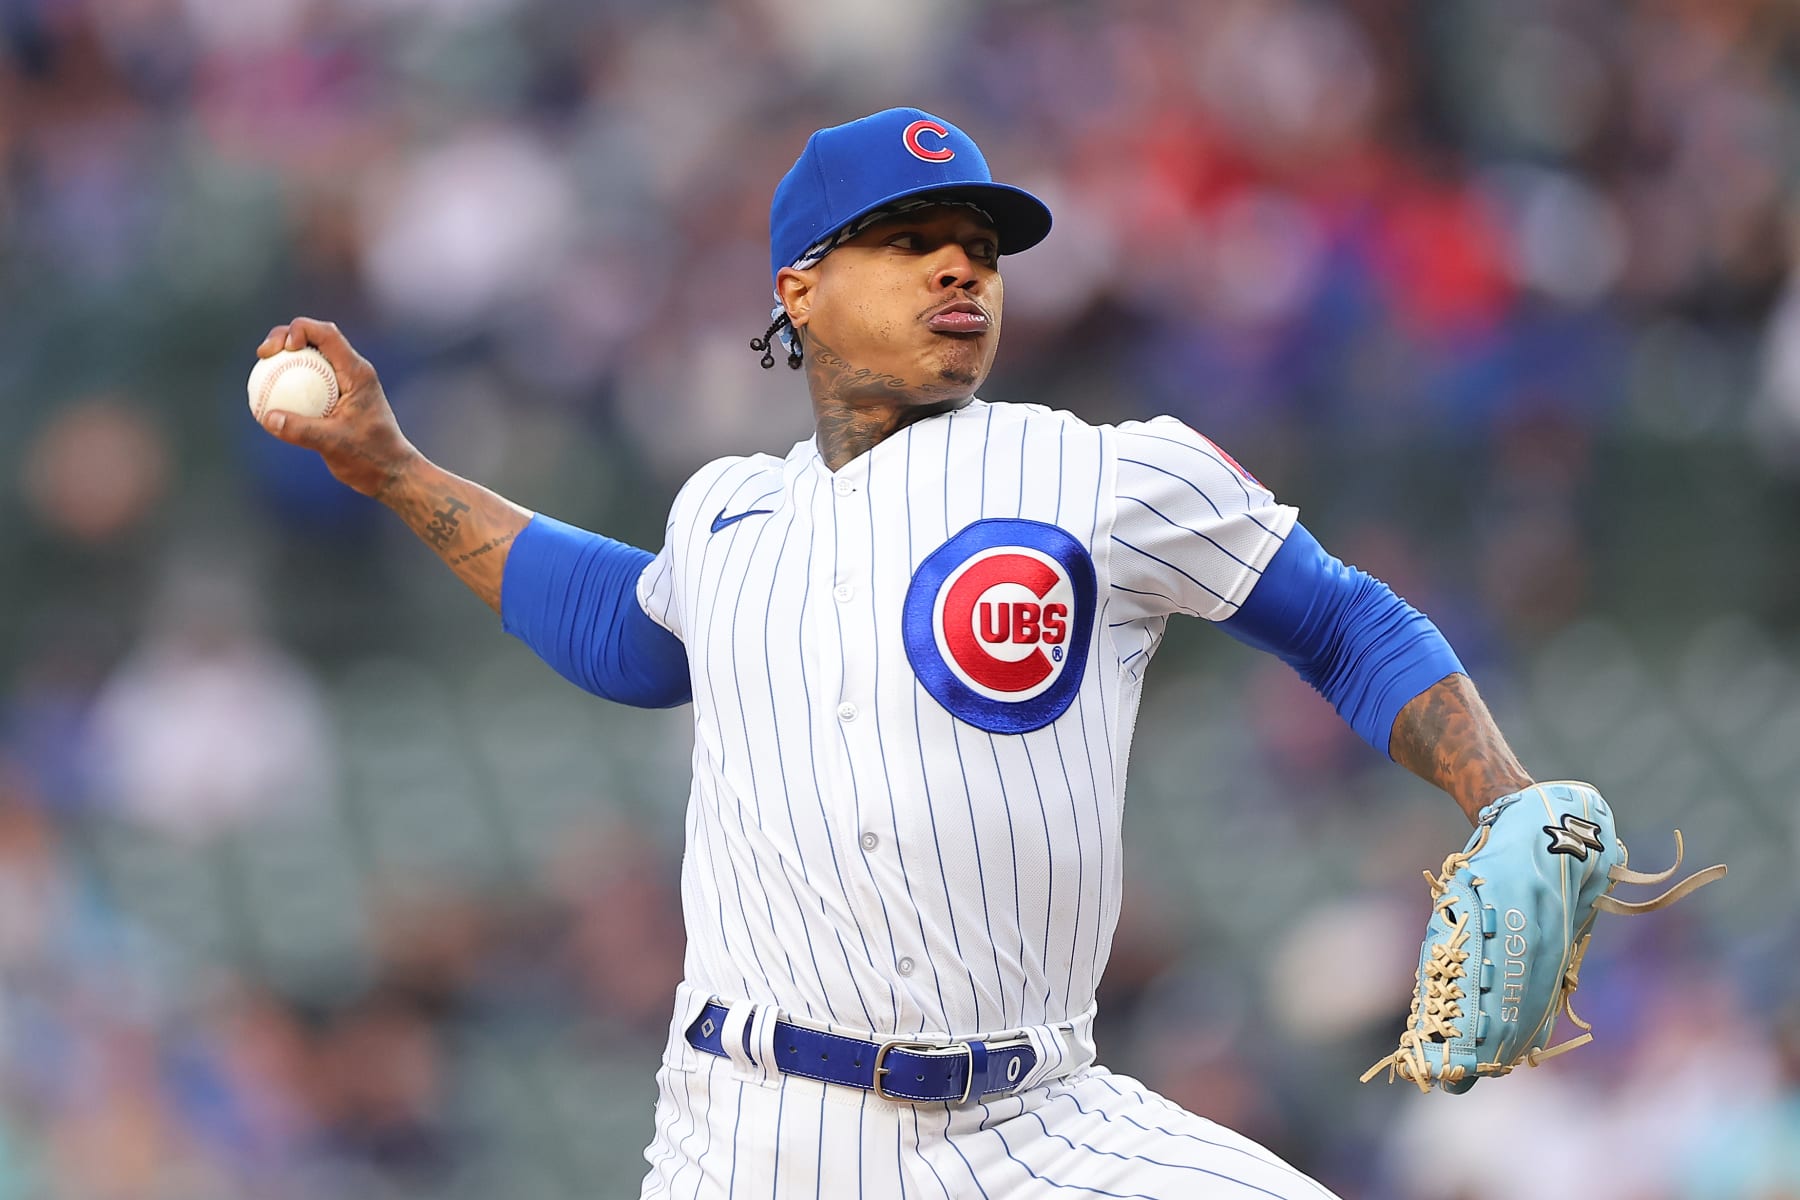 2023 MLB All-Star Game: Who are the pitchers and reserve players? - AS USA